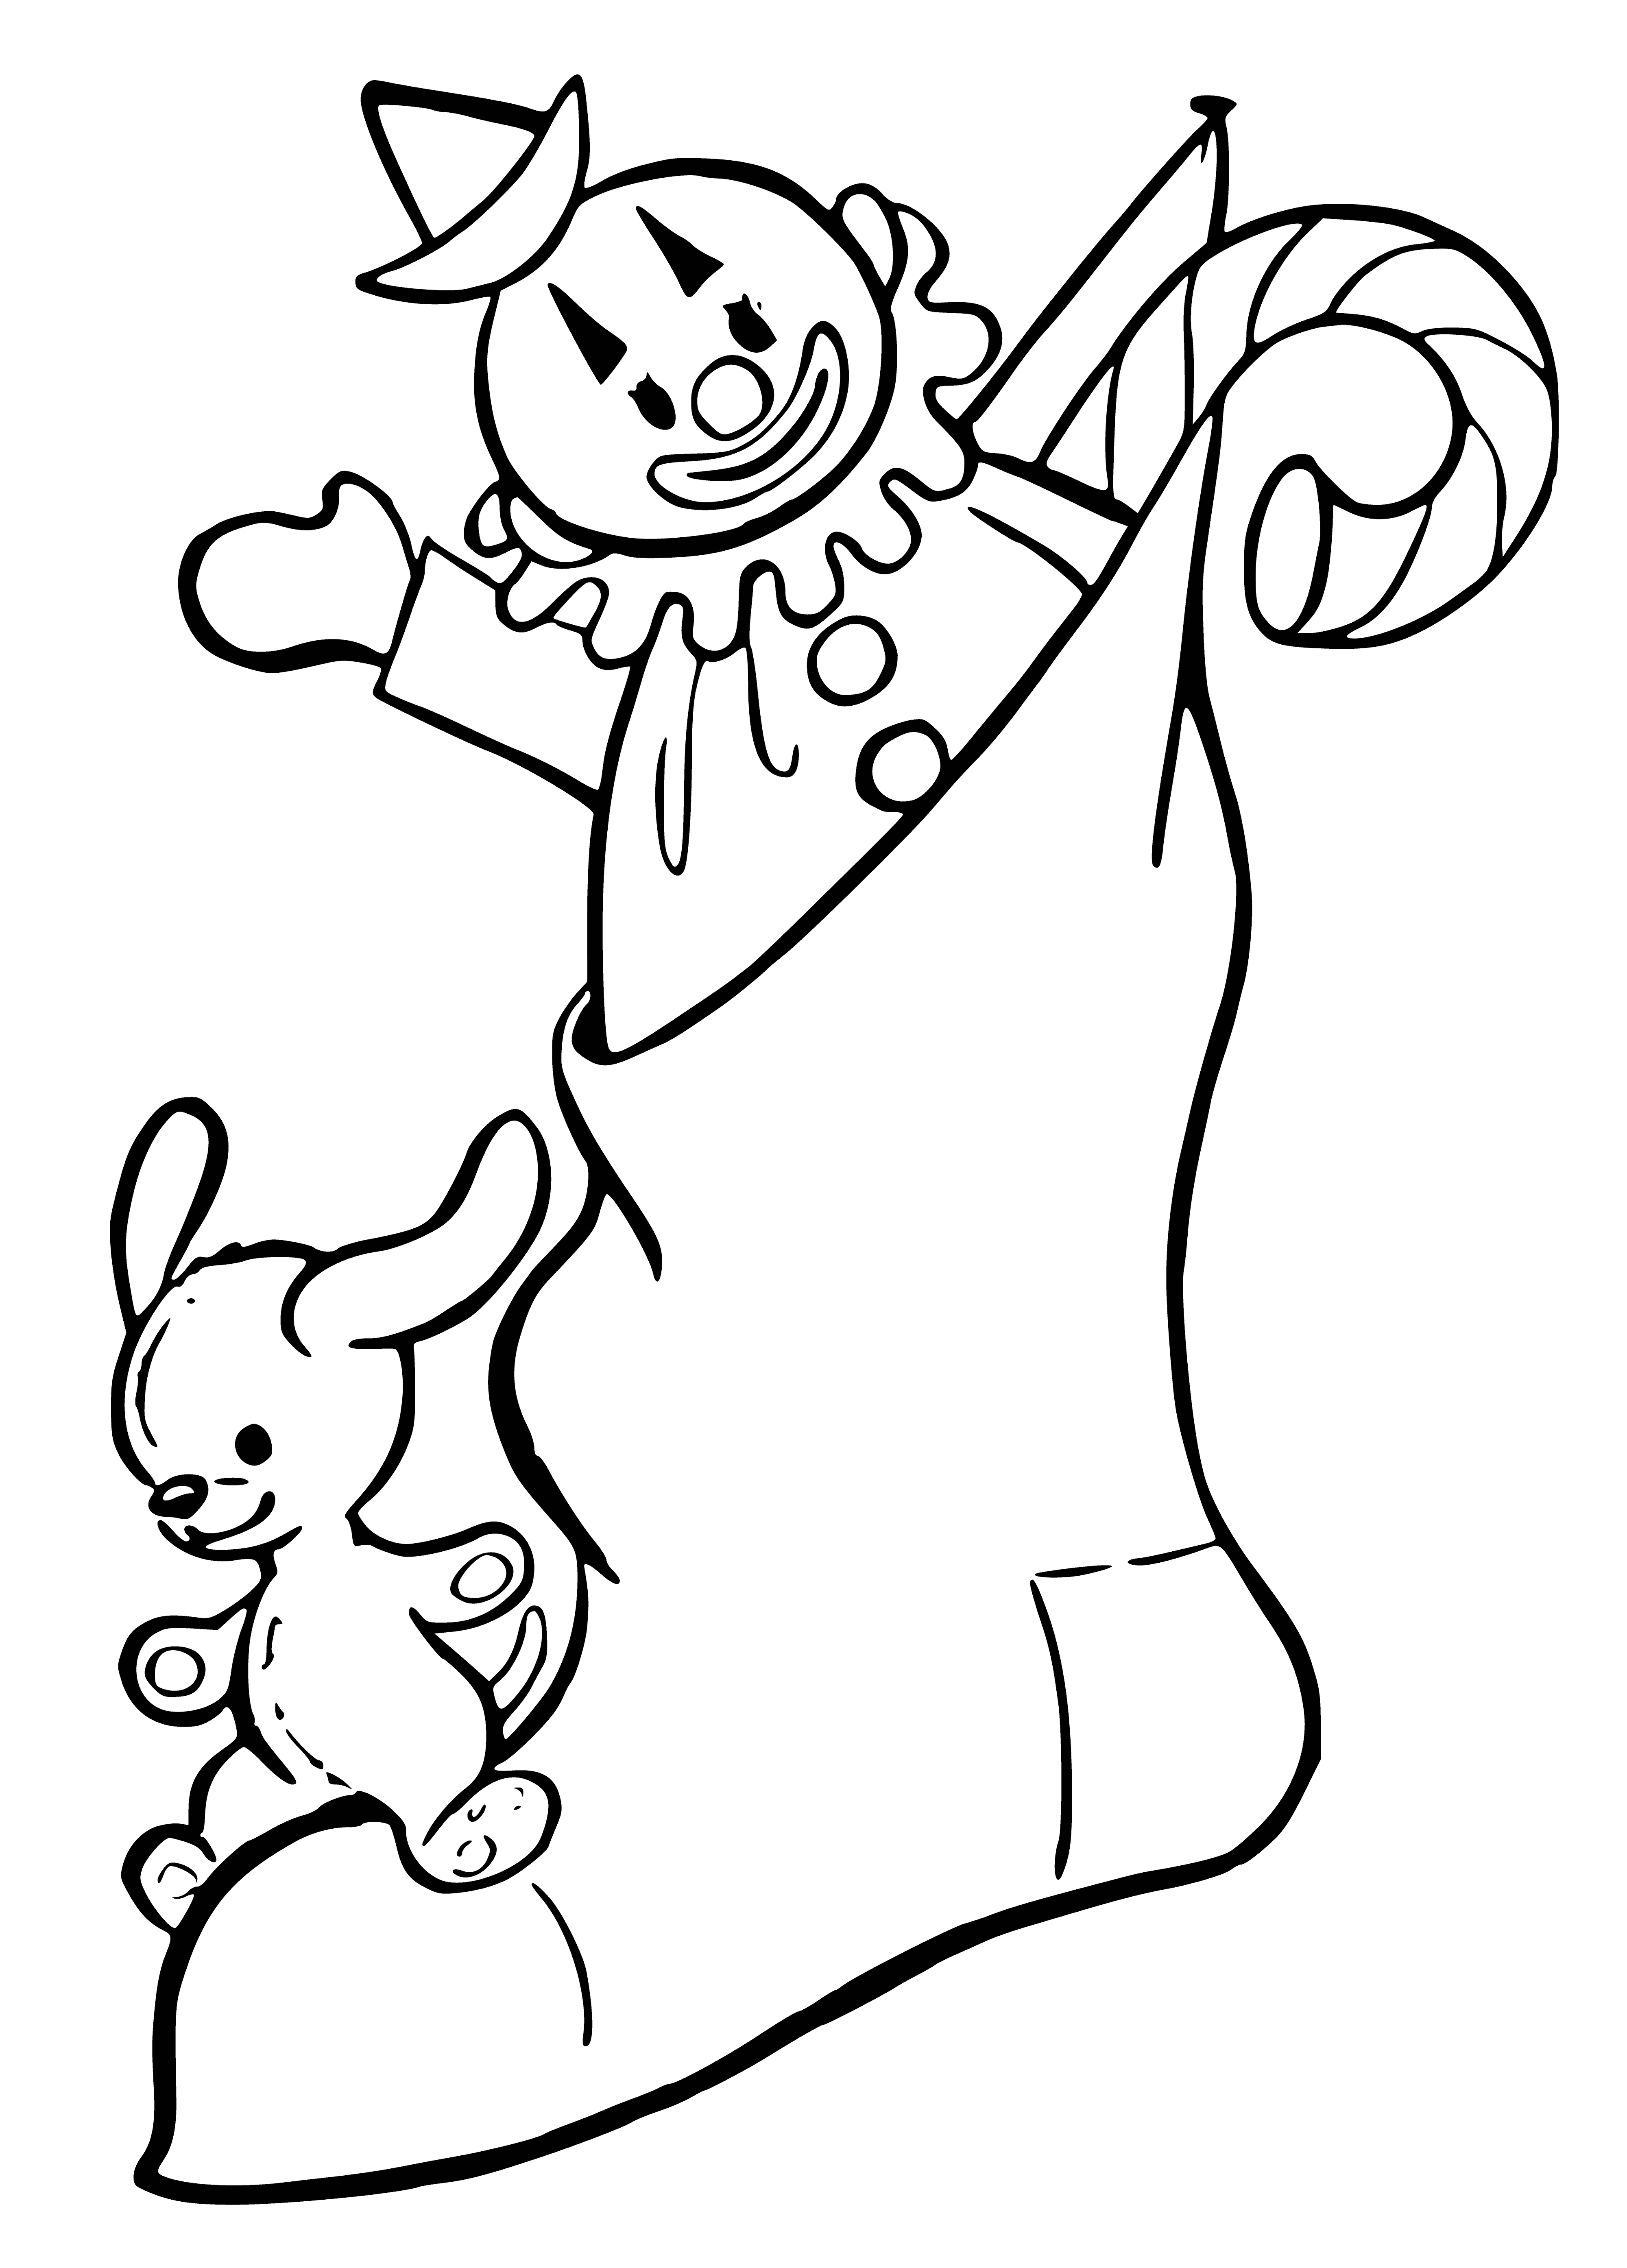 coloring page: Coloring page has socks w/ Christmas symbols (X-tree, gingerbread, snowman, reindeer) in green, red & white. #holidaycolor